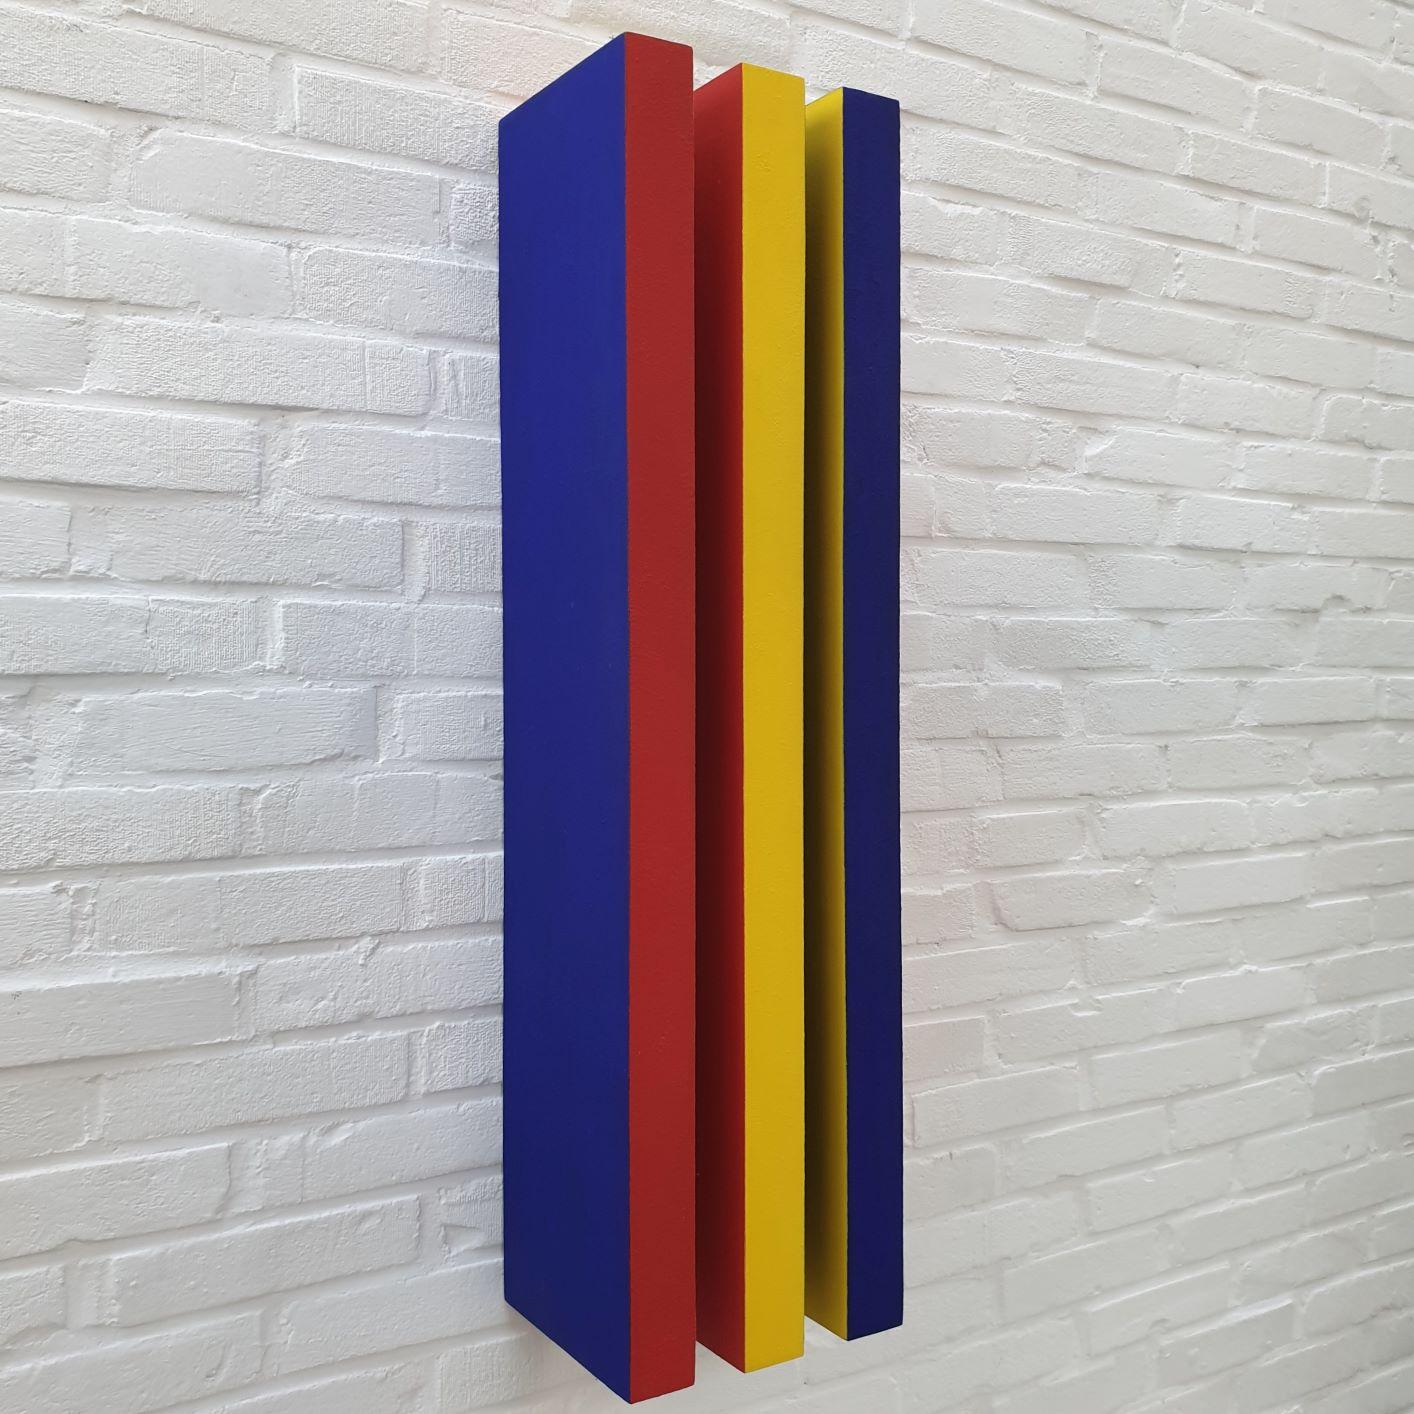 Réflexion des couleurs - red yellow blue contemporary modern painting relief - Brown Abstract Sculpture by Olivier Julia